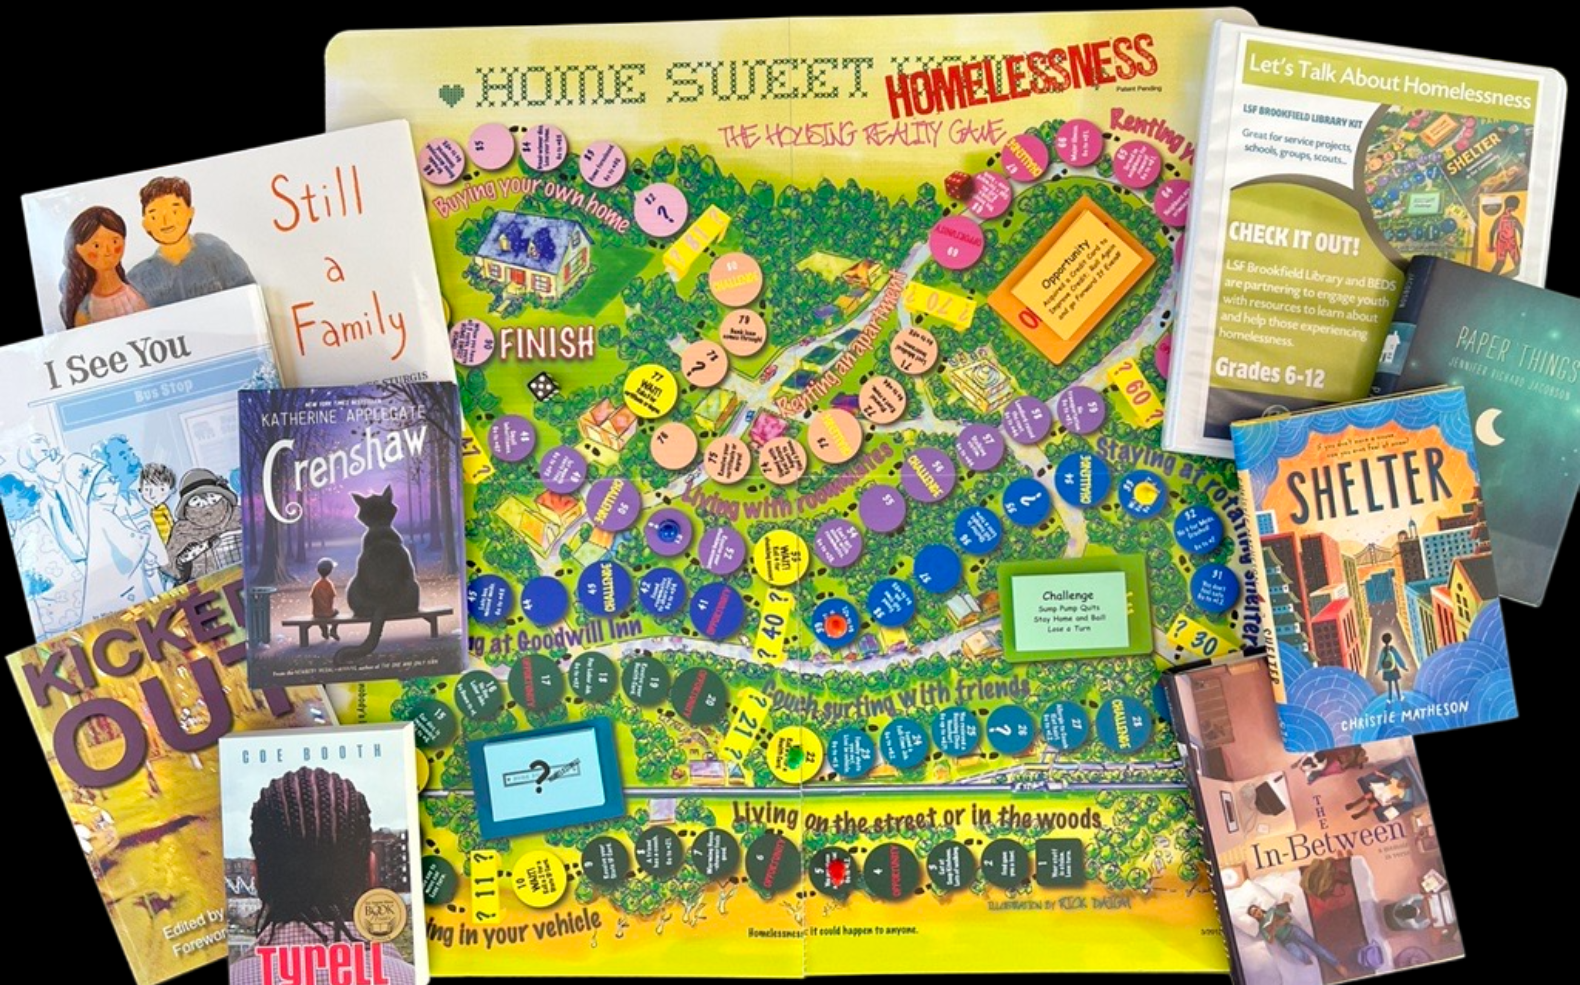 Homelessness Educational Kit Image with books and Home Sweet Homelessness Board Game